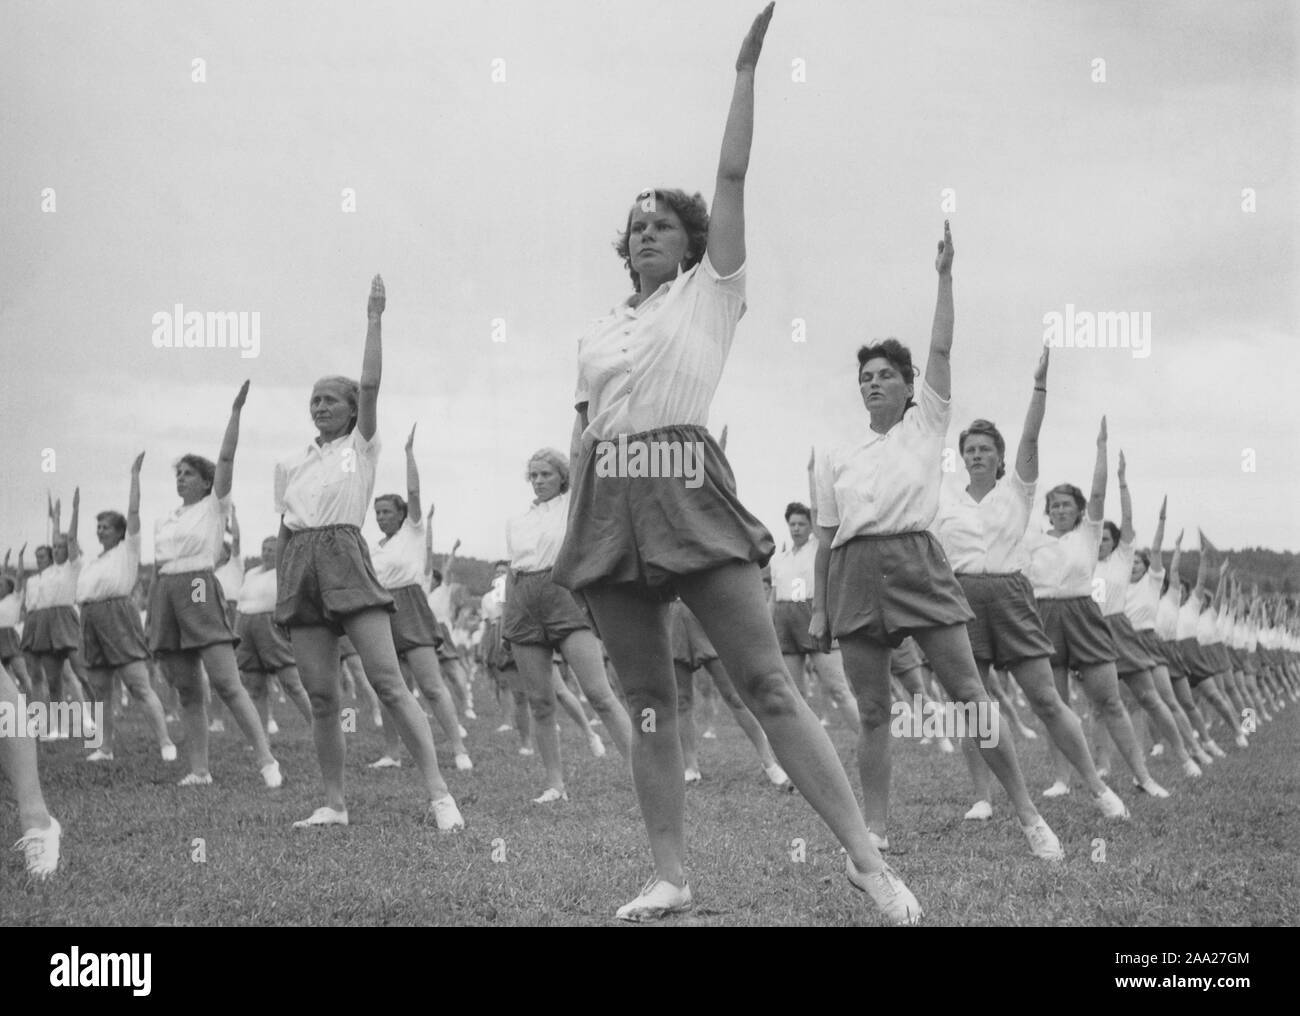 Gymnastics in the 1940s. The popular womens housewife gymnastics is being practiced everywhere. In the 1940s the knowledge on physical exercise encreased and the need of being active, both women and men.  Here a large number of women exercising together outdoors. Sweden 1949 Stock Photo